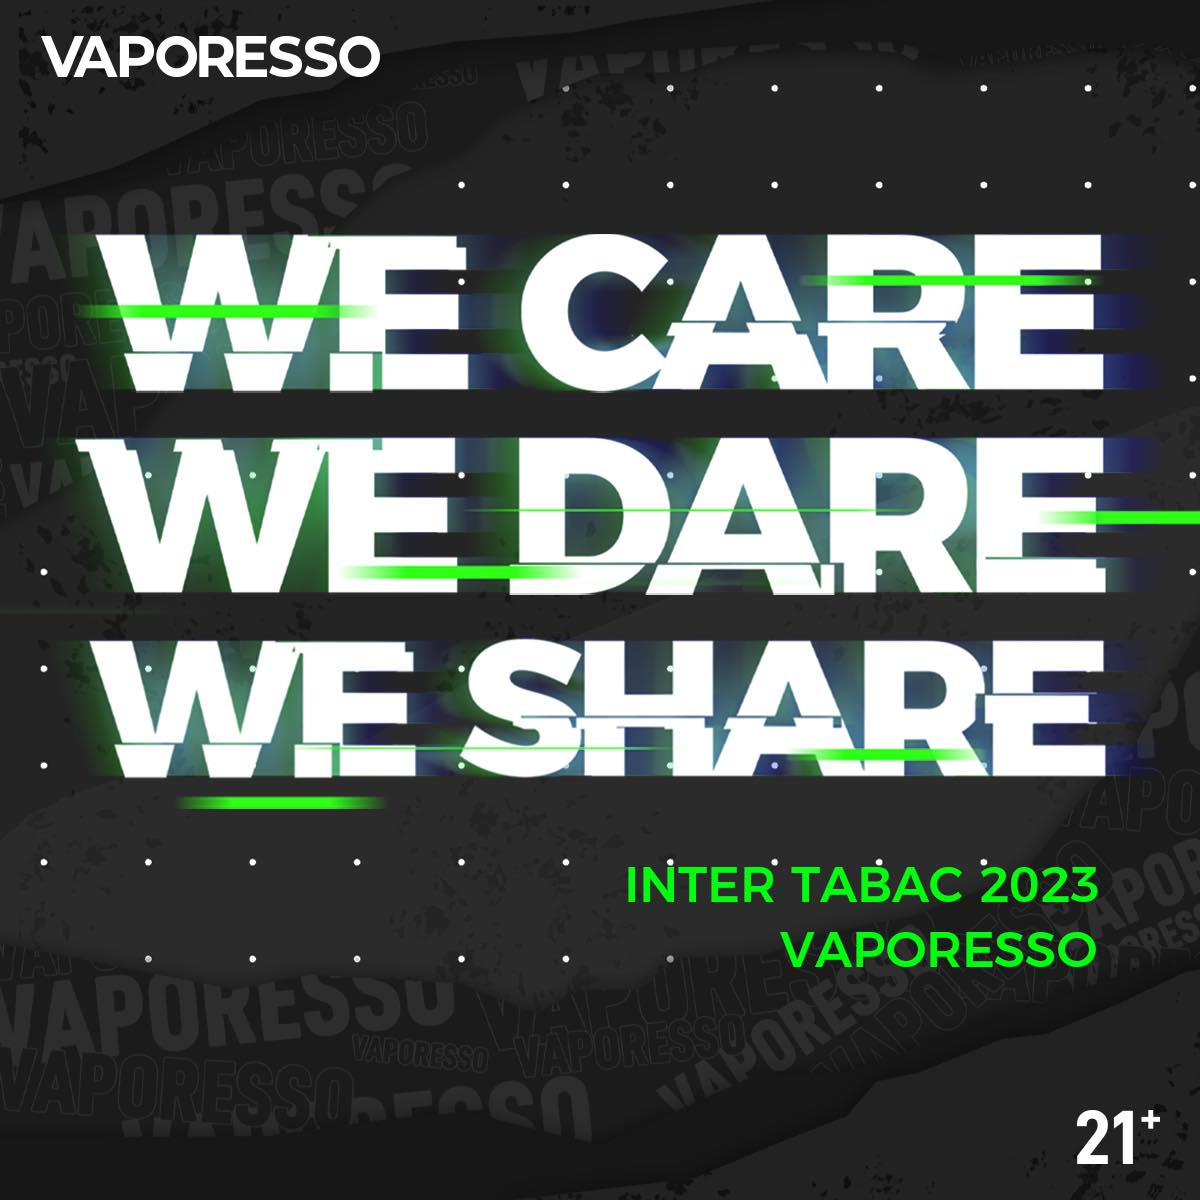 Vaporesso Vaping Products …